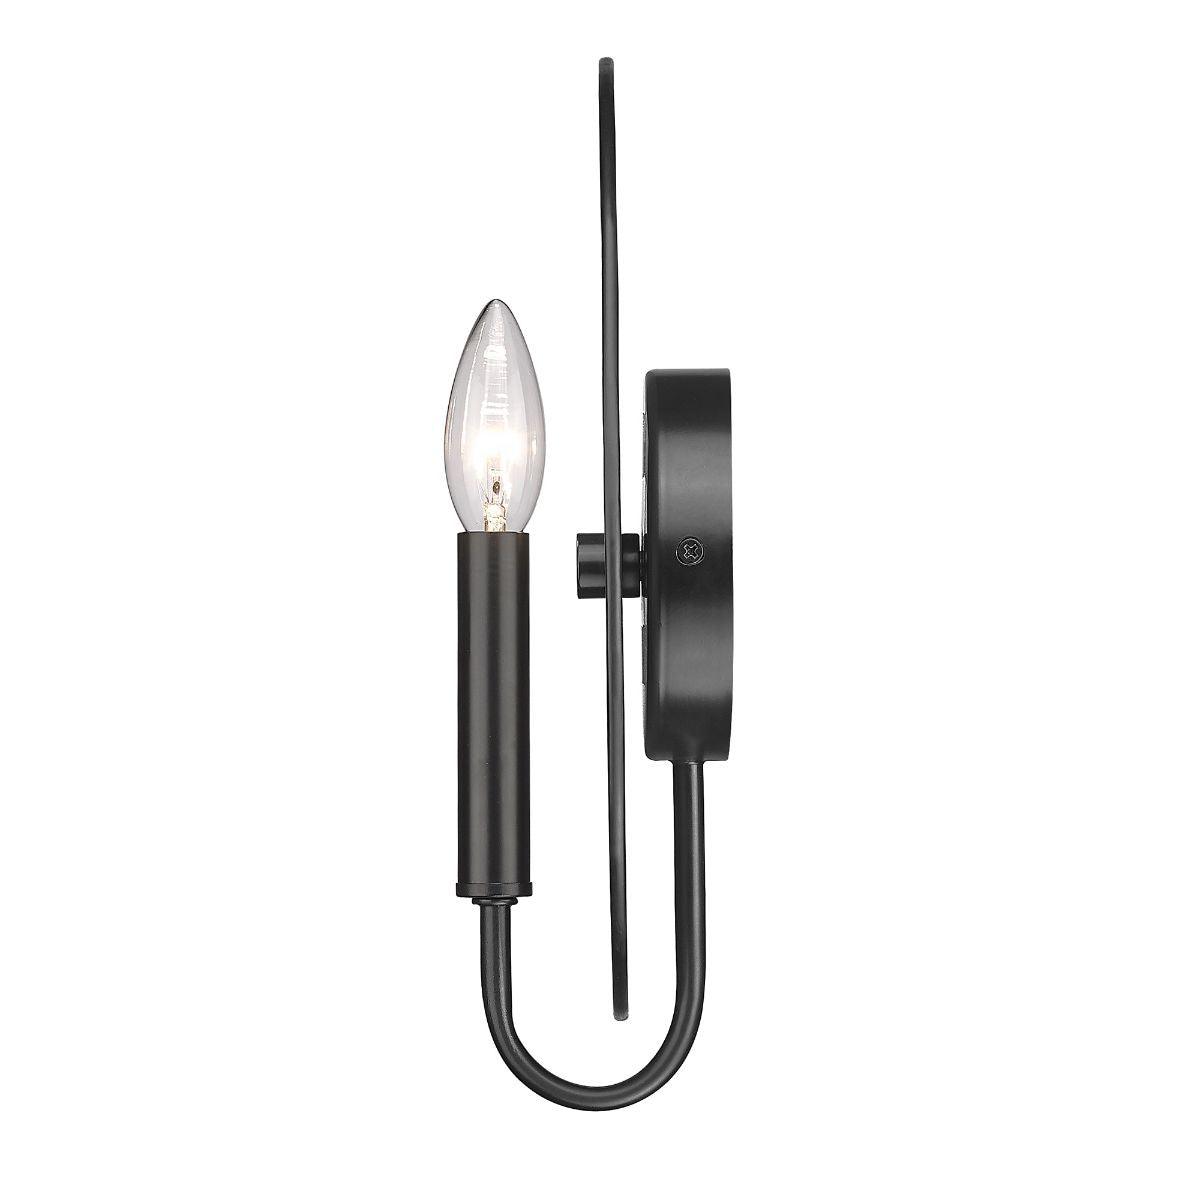 Tessa 12 in. Armed Wall Sconce Matte Black Finish